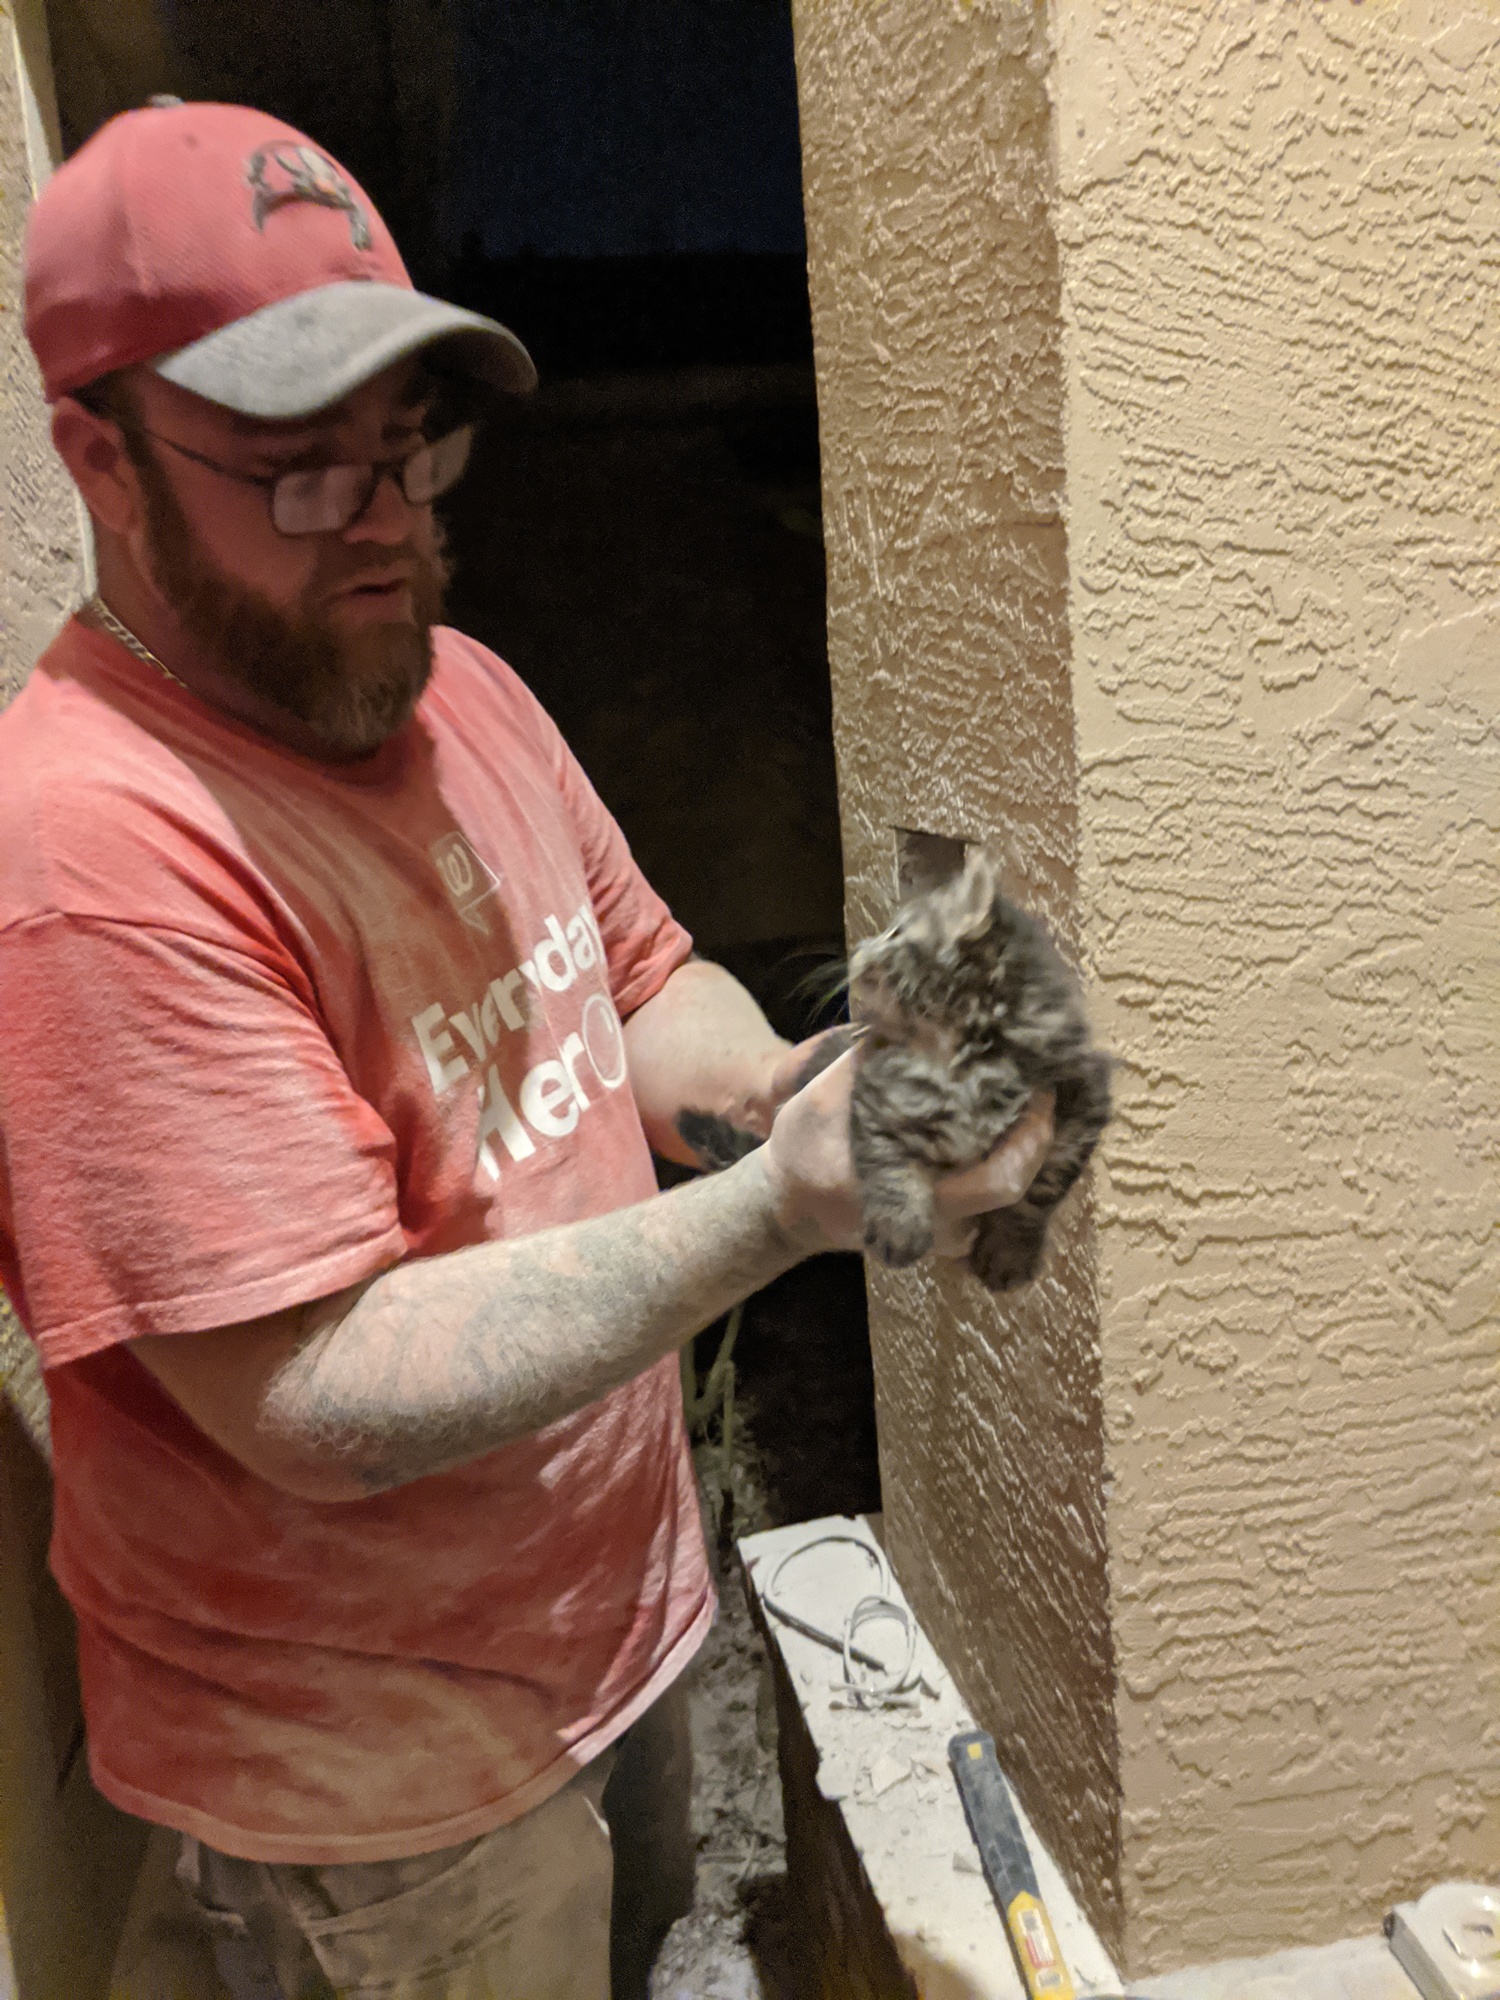 The stunned kitten couldn’t take its eyes off its rescuer, Jake McKenna.